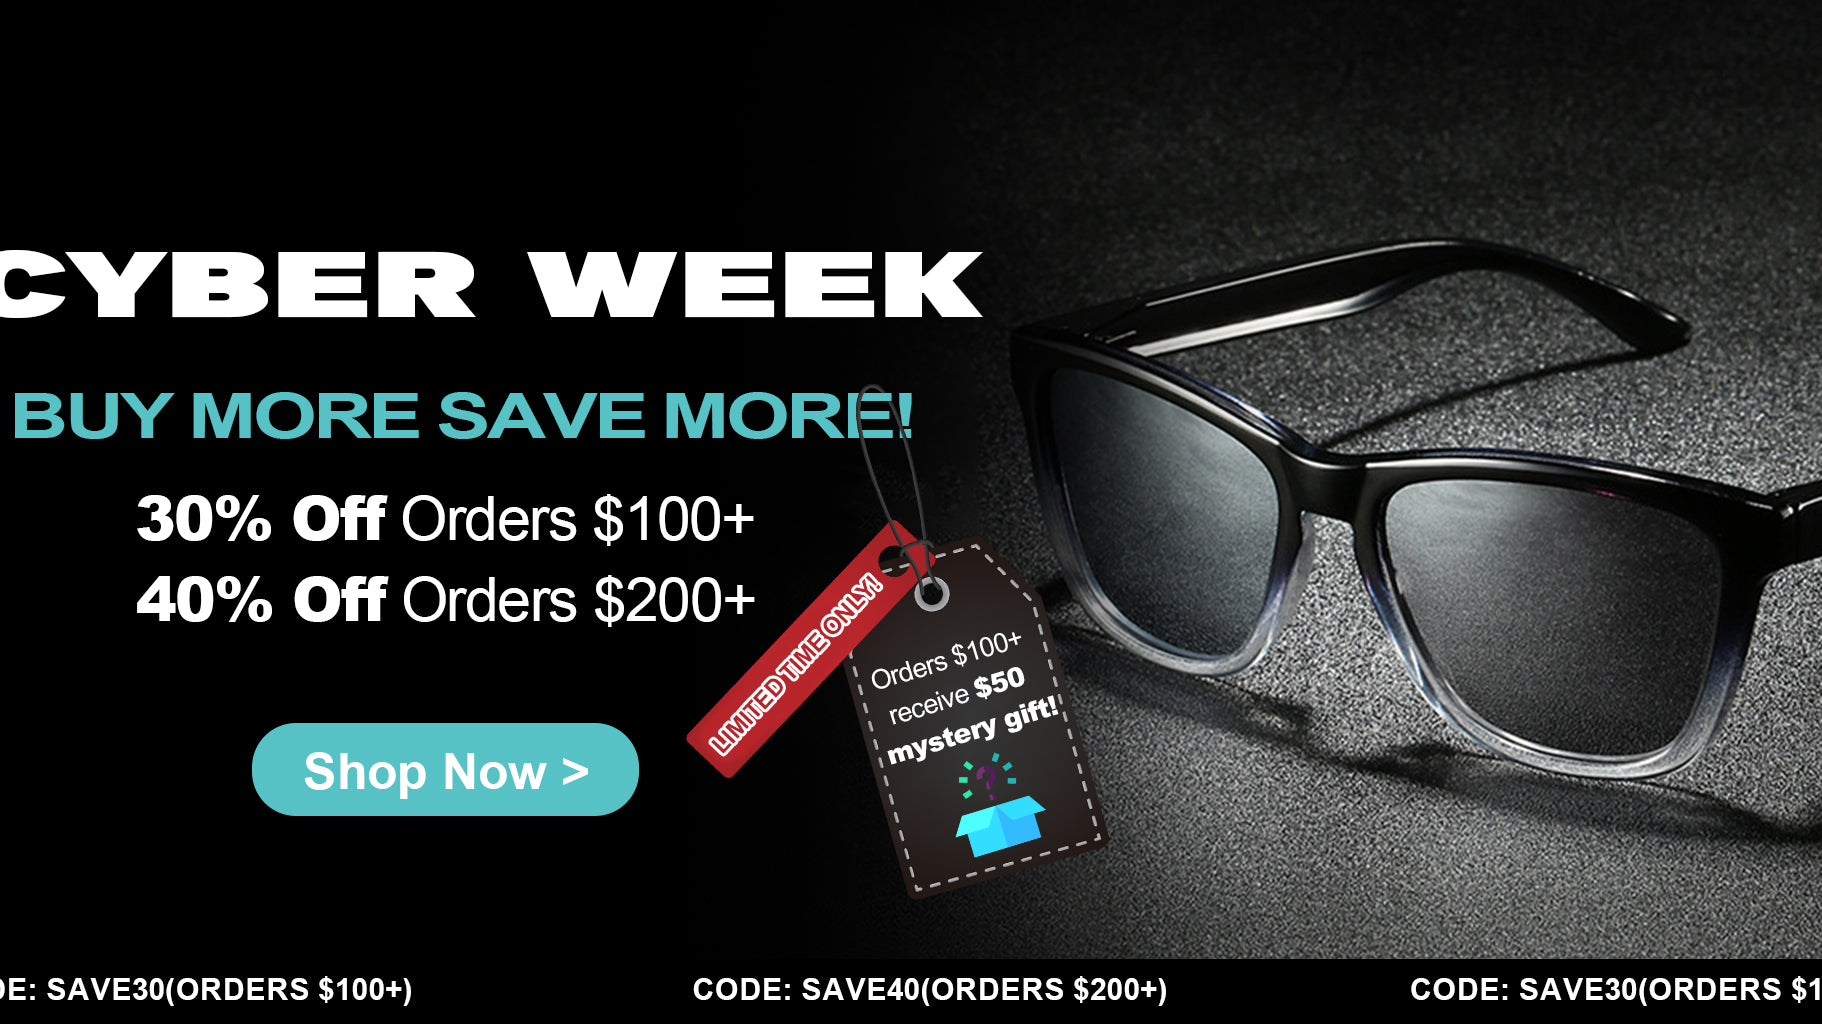 Get Ready for Cyber Week at Gentseyewear: Buy More, Save More!